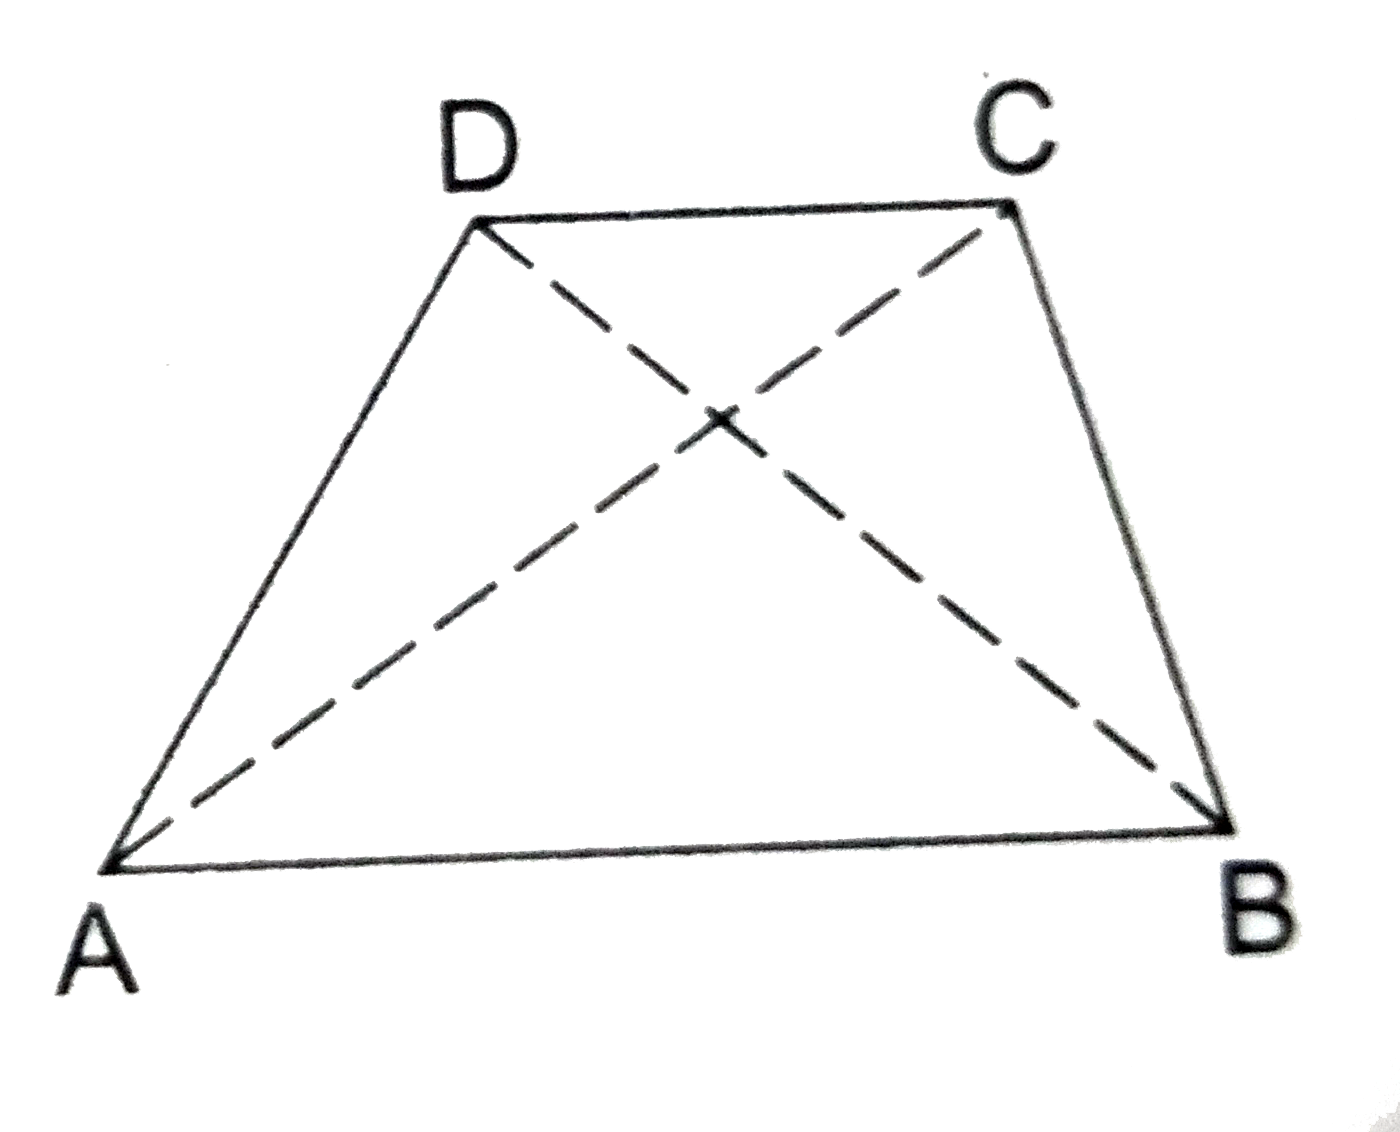 In the adjoining figure,  ABCD is a quadrilateral in which AB is the longest side and CD is the shortest side.   Prove that (i) angle C gt angle A,